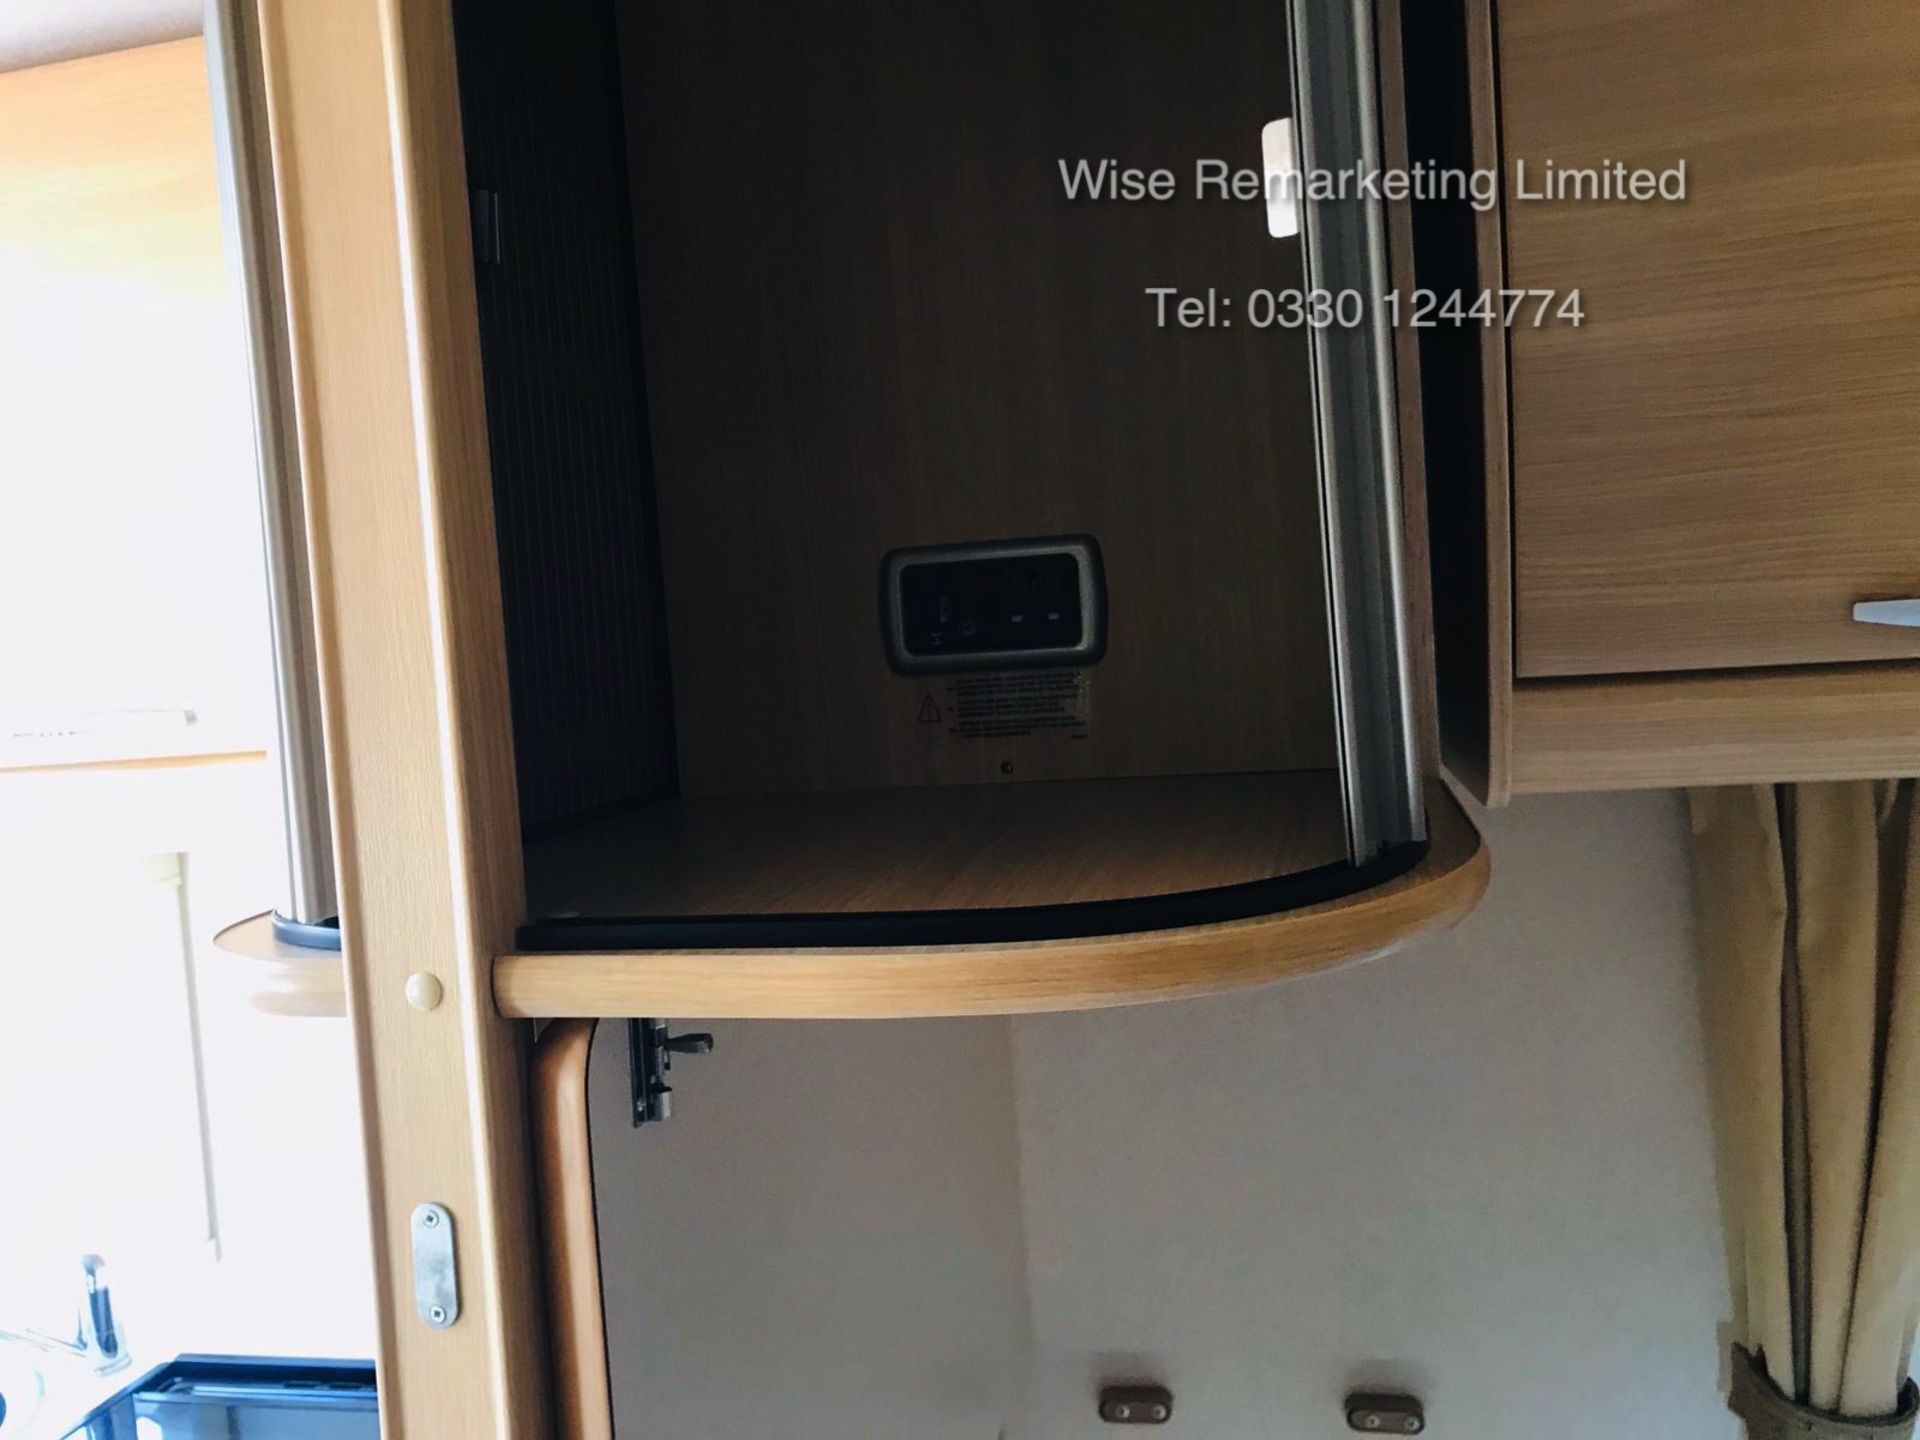 (RESERVE MET) Swift Abbey Freestyle 480 (4 Berth) Caravan - 2008 Model - 1 Former Keeper From New - Image 27 of 32